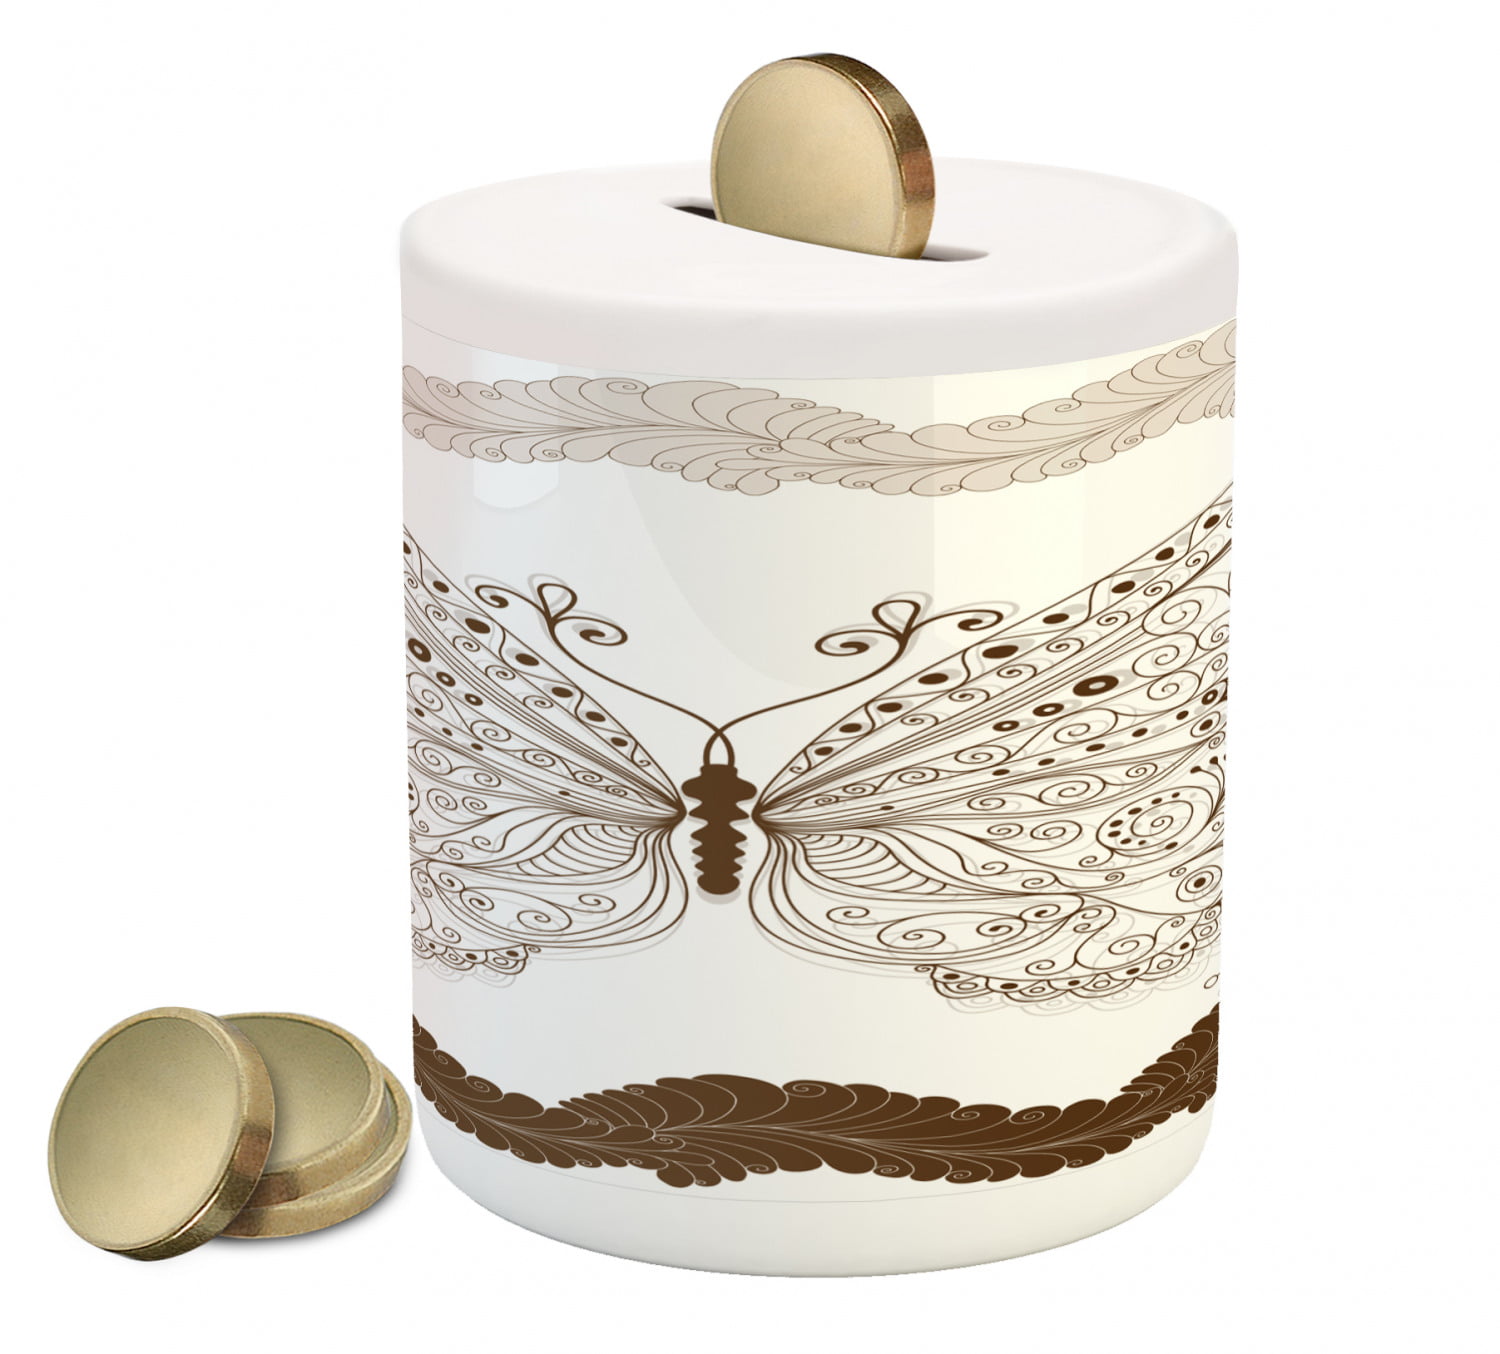 Butterfly Piggy Bank, Insect Art Swirled Wings Vintage Modern Fashion Style Print, Ceramic Coin Bank Money Box for Cash Saving, 3.6" X 3.2", White Brown Grey, by - Walmart.com